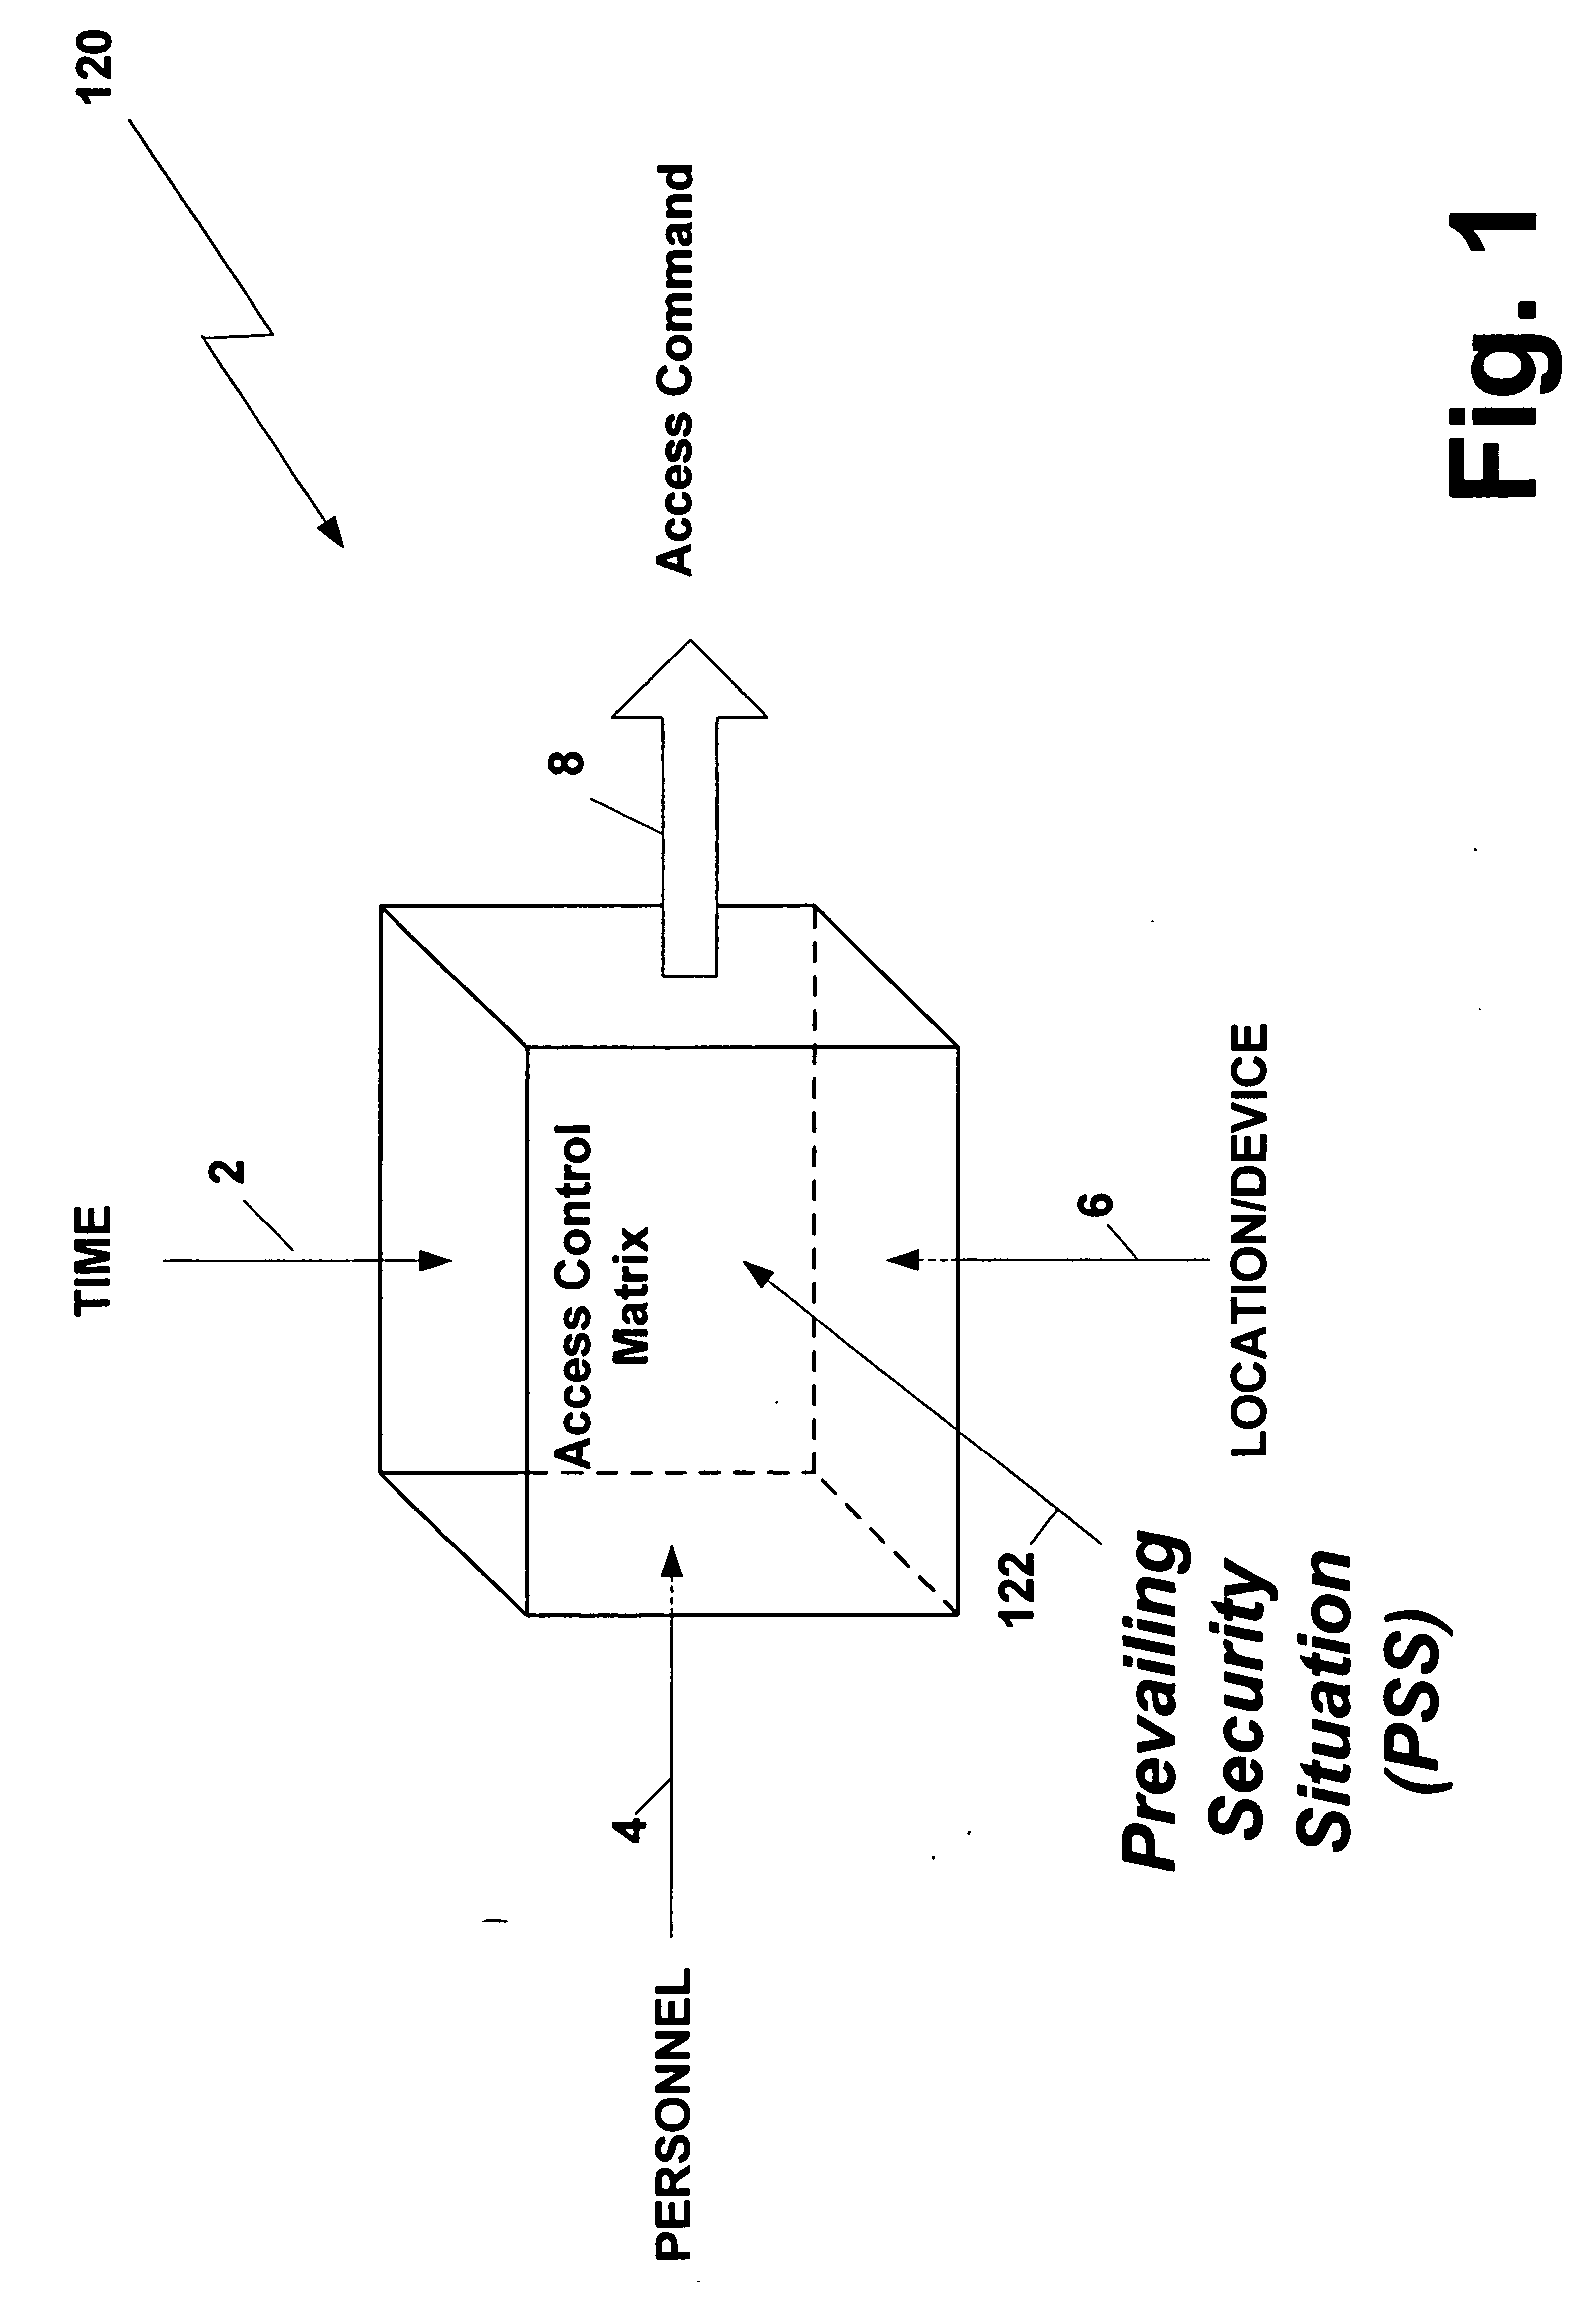 Access and security control system and method